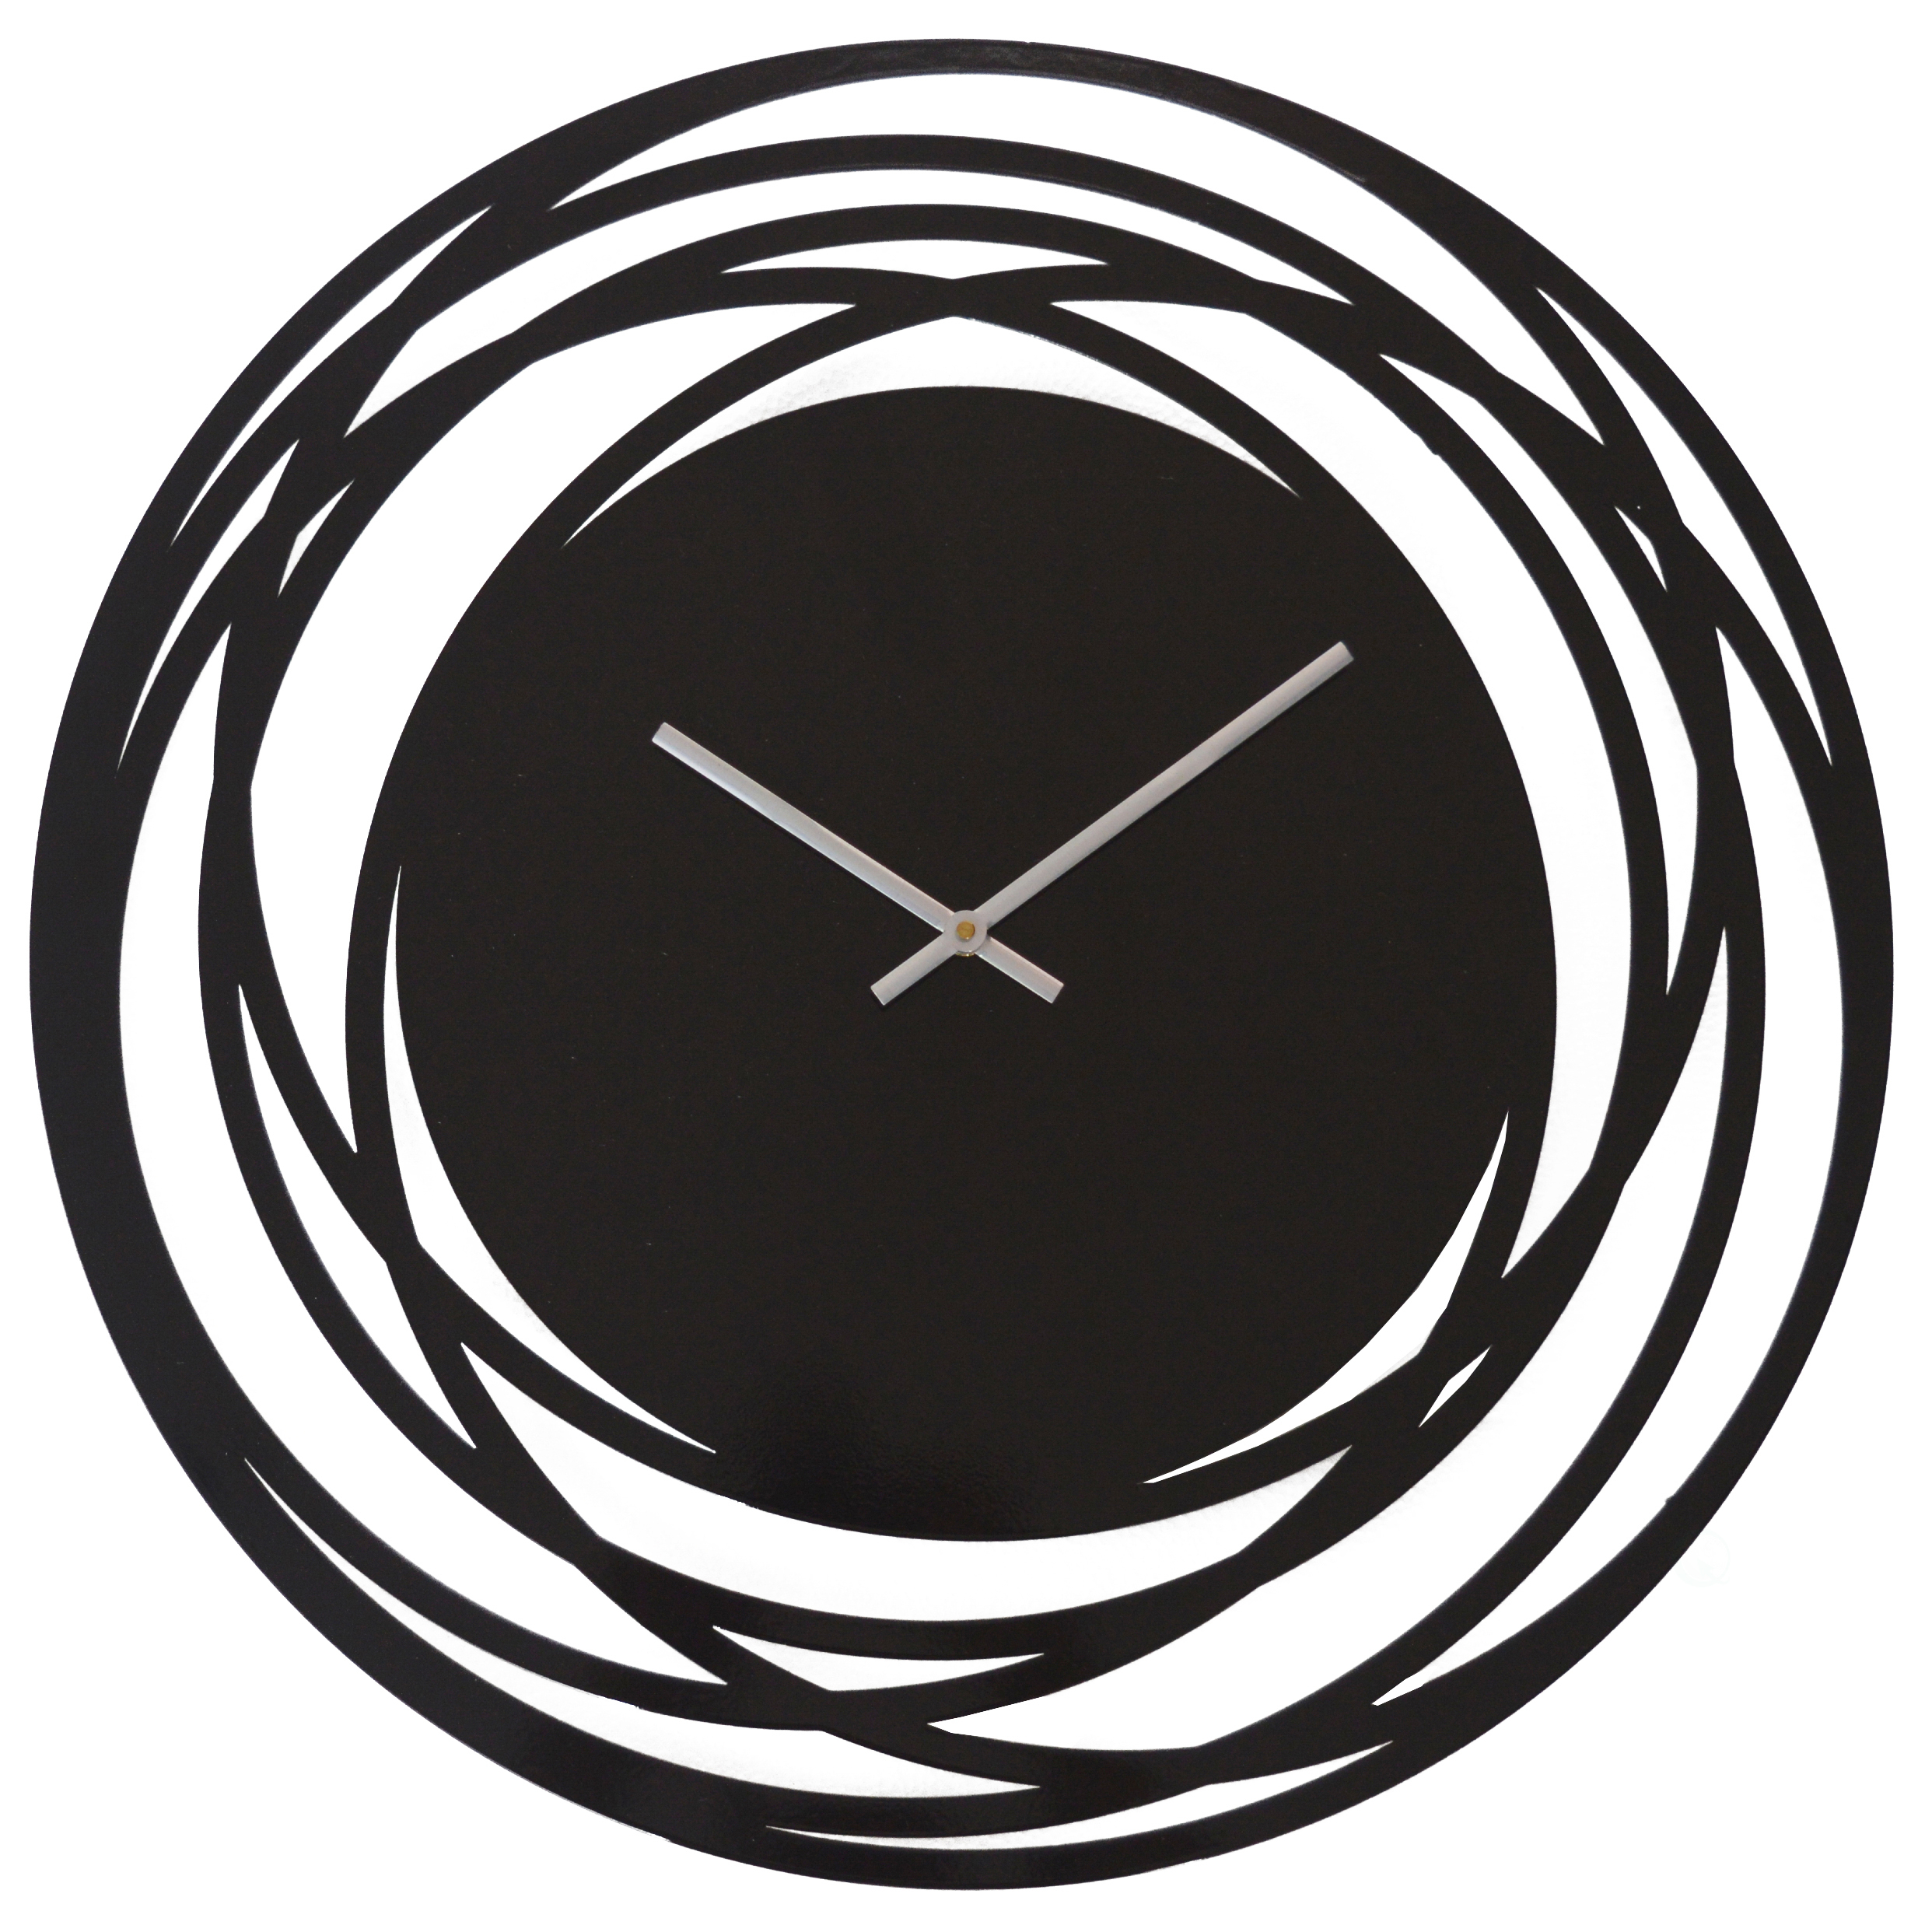 Decorative Contemporary Metal Wall Clock with Black Circled Frame